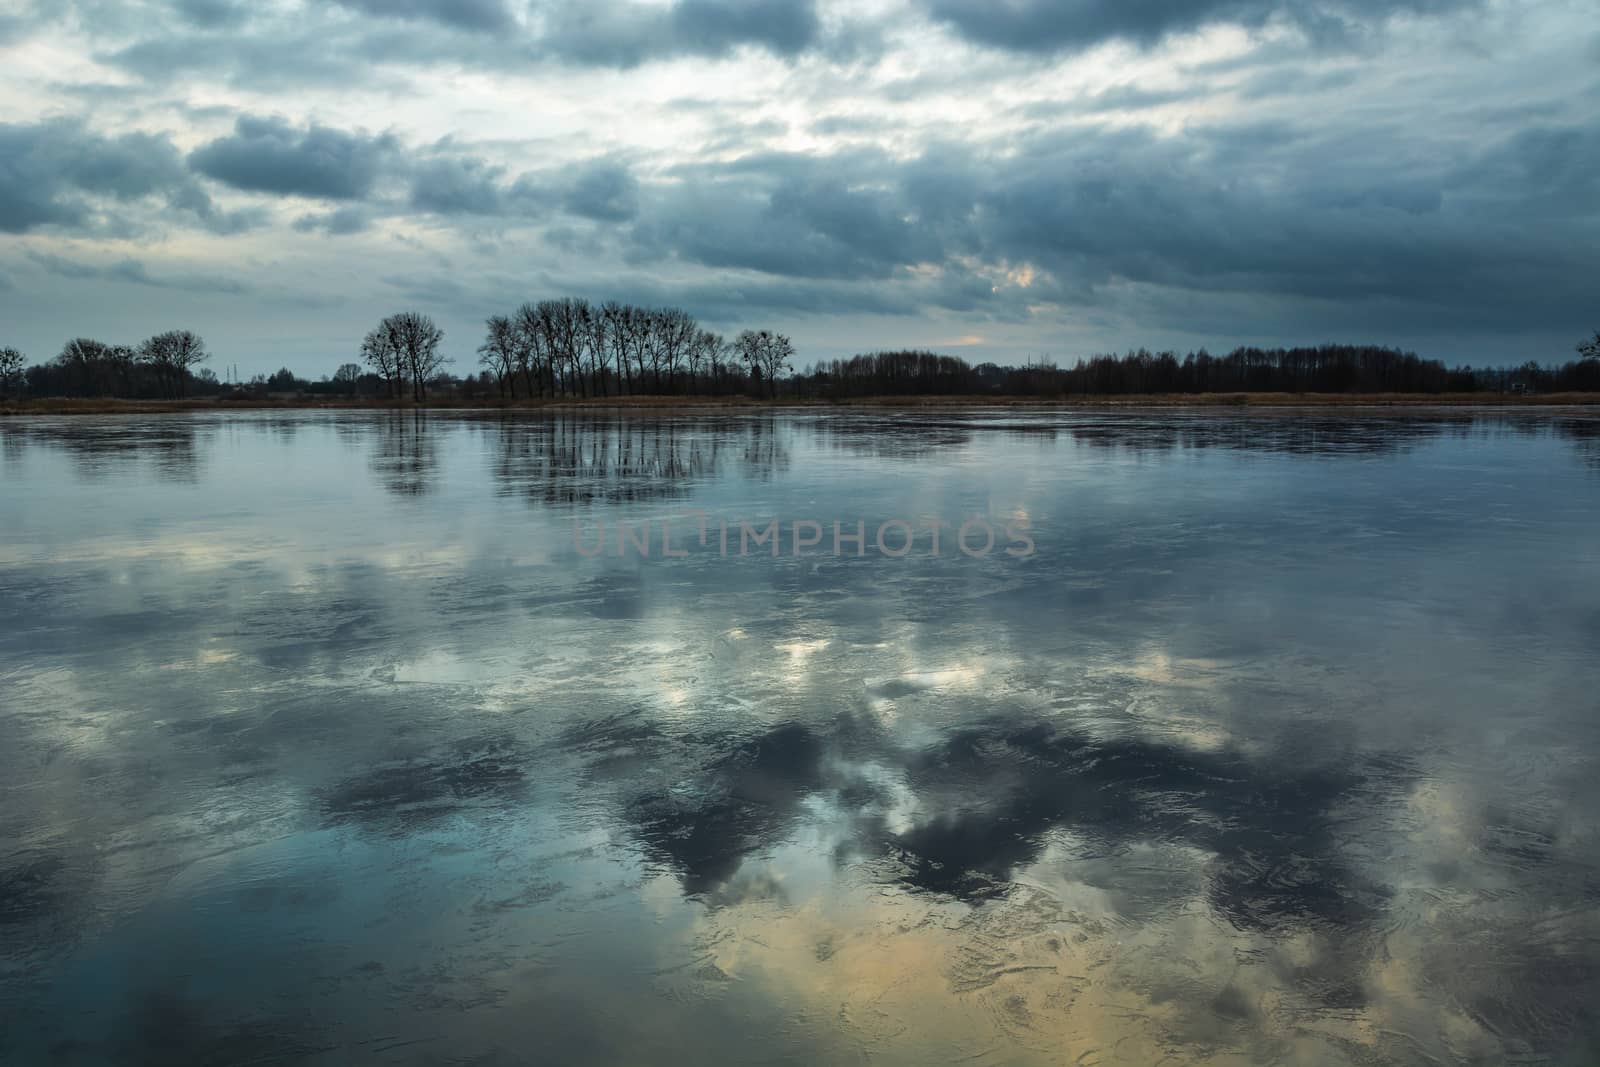 The reflection of clouds in the ice on the lake, winter view